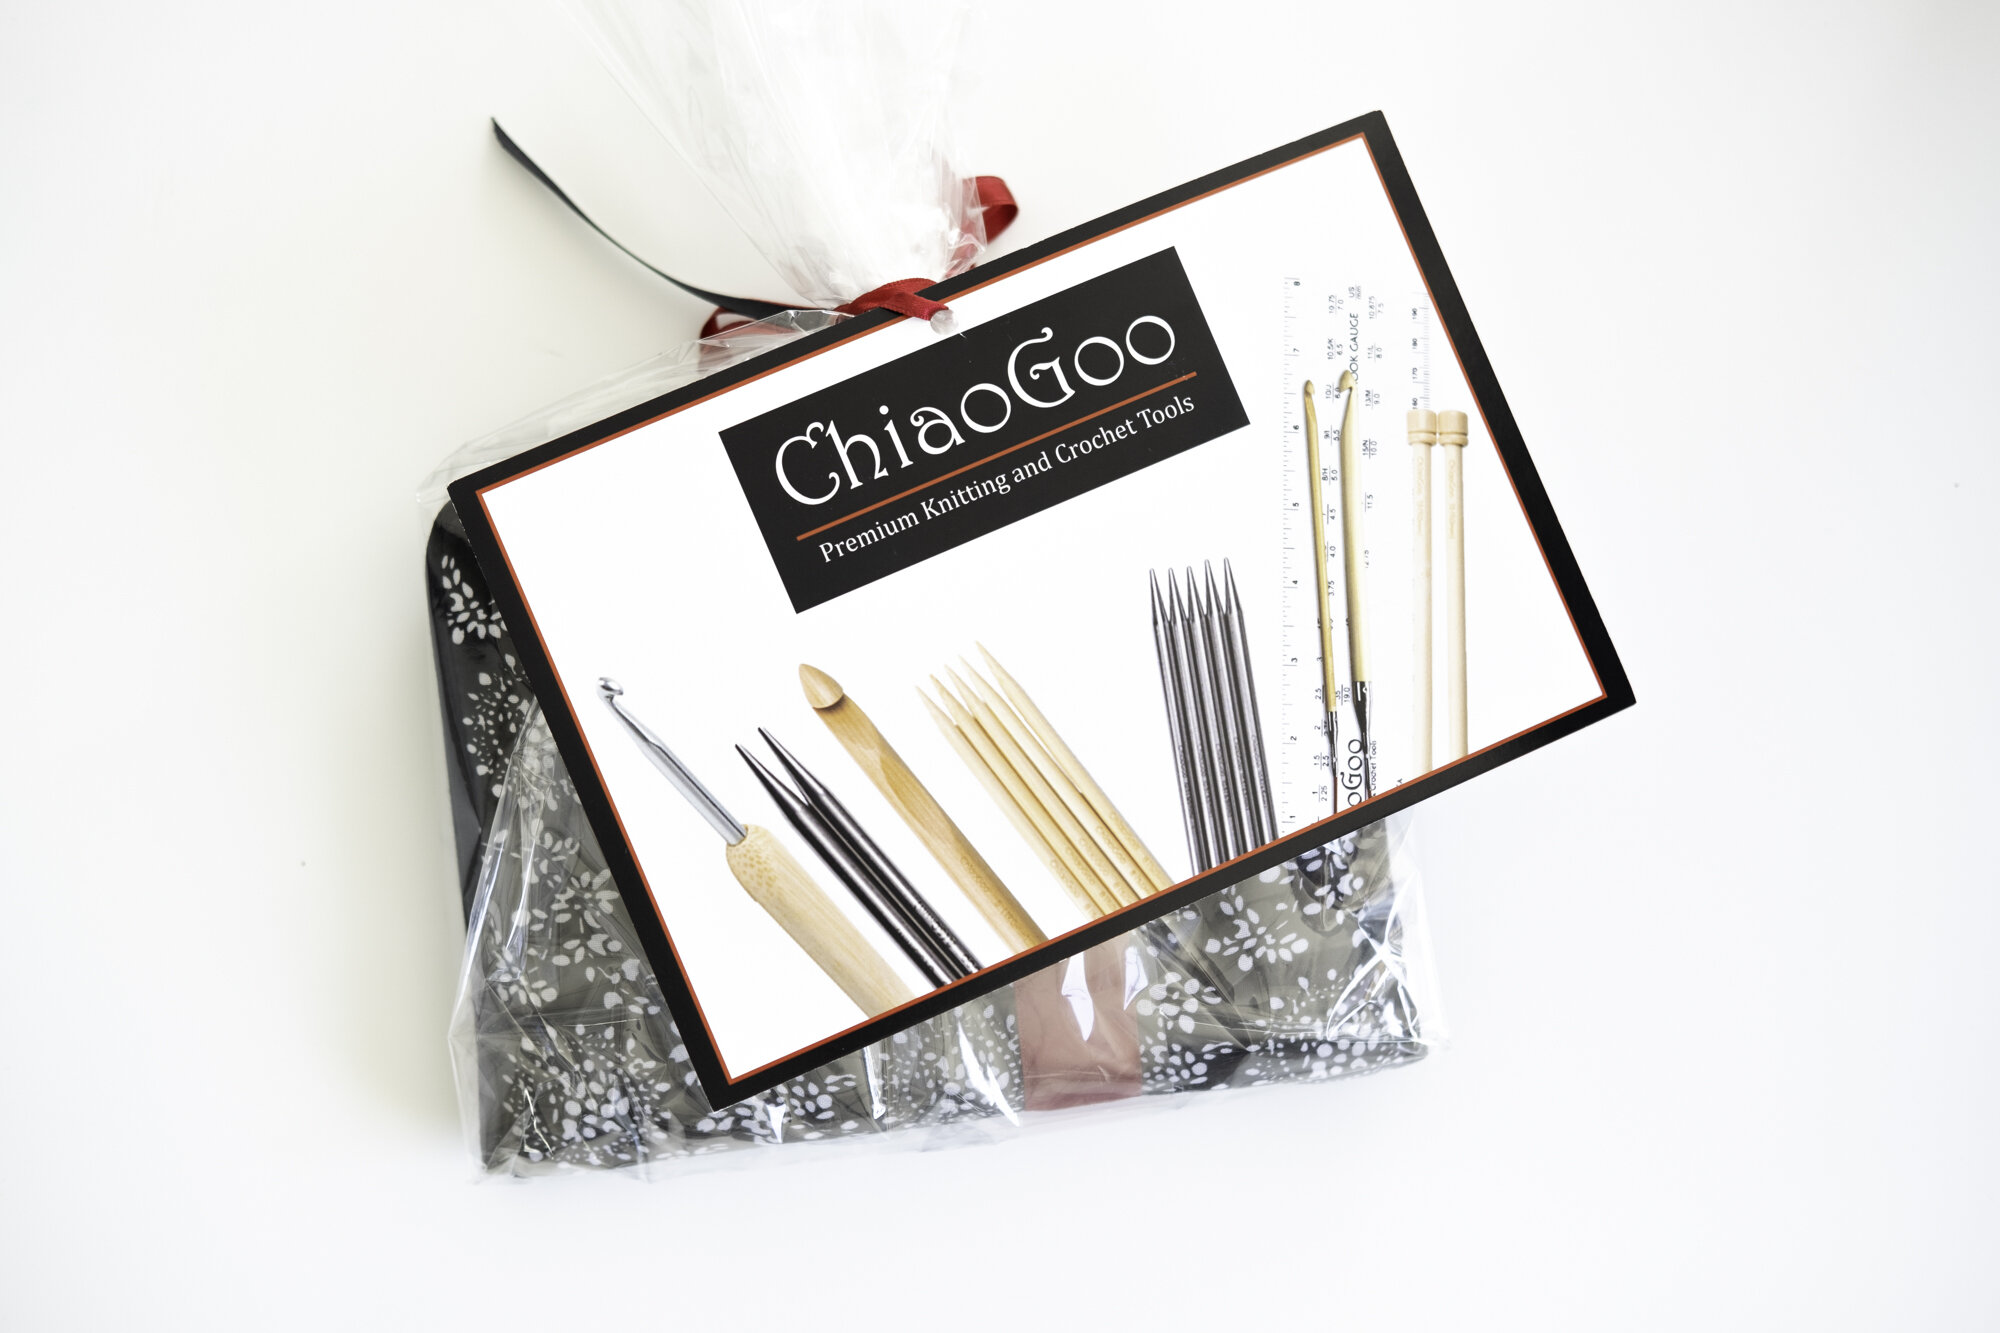 ChiaoGoo - Interchangeable Tool Kit (for Small, Large, and Complete se